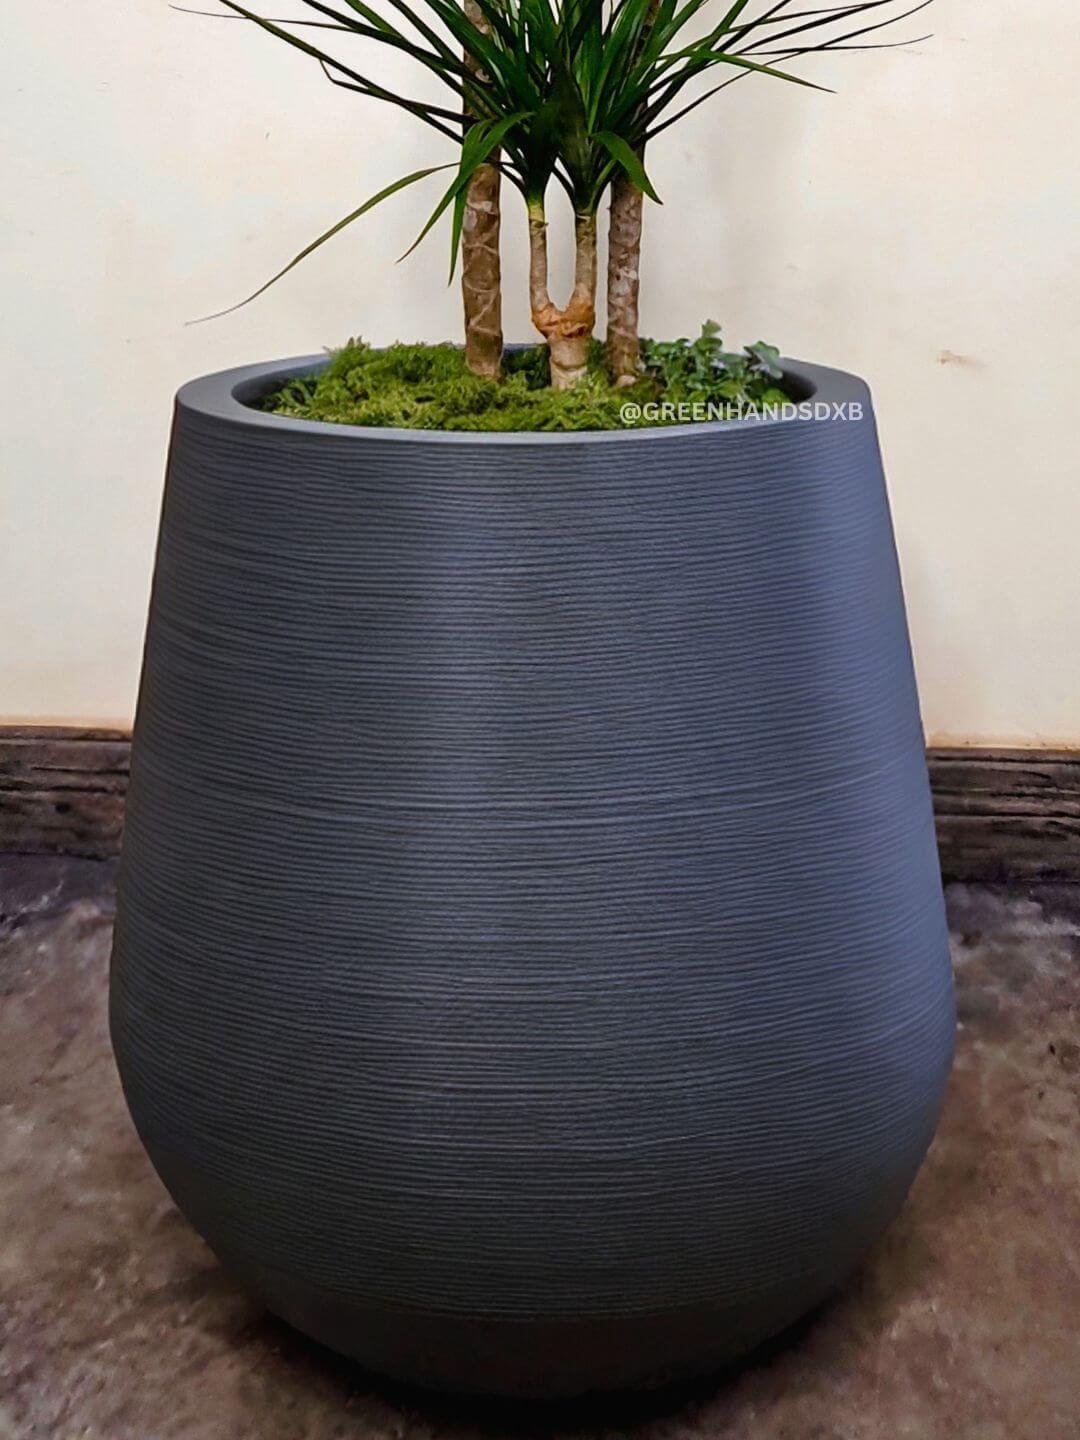 Potted XL Bird of Paradise or Strelitzia Nicolai | Designer Collection Burj XL Planted in Black Pot Sand Finished